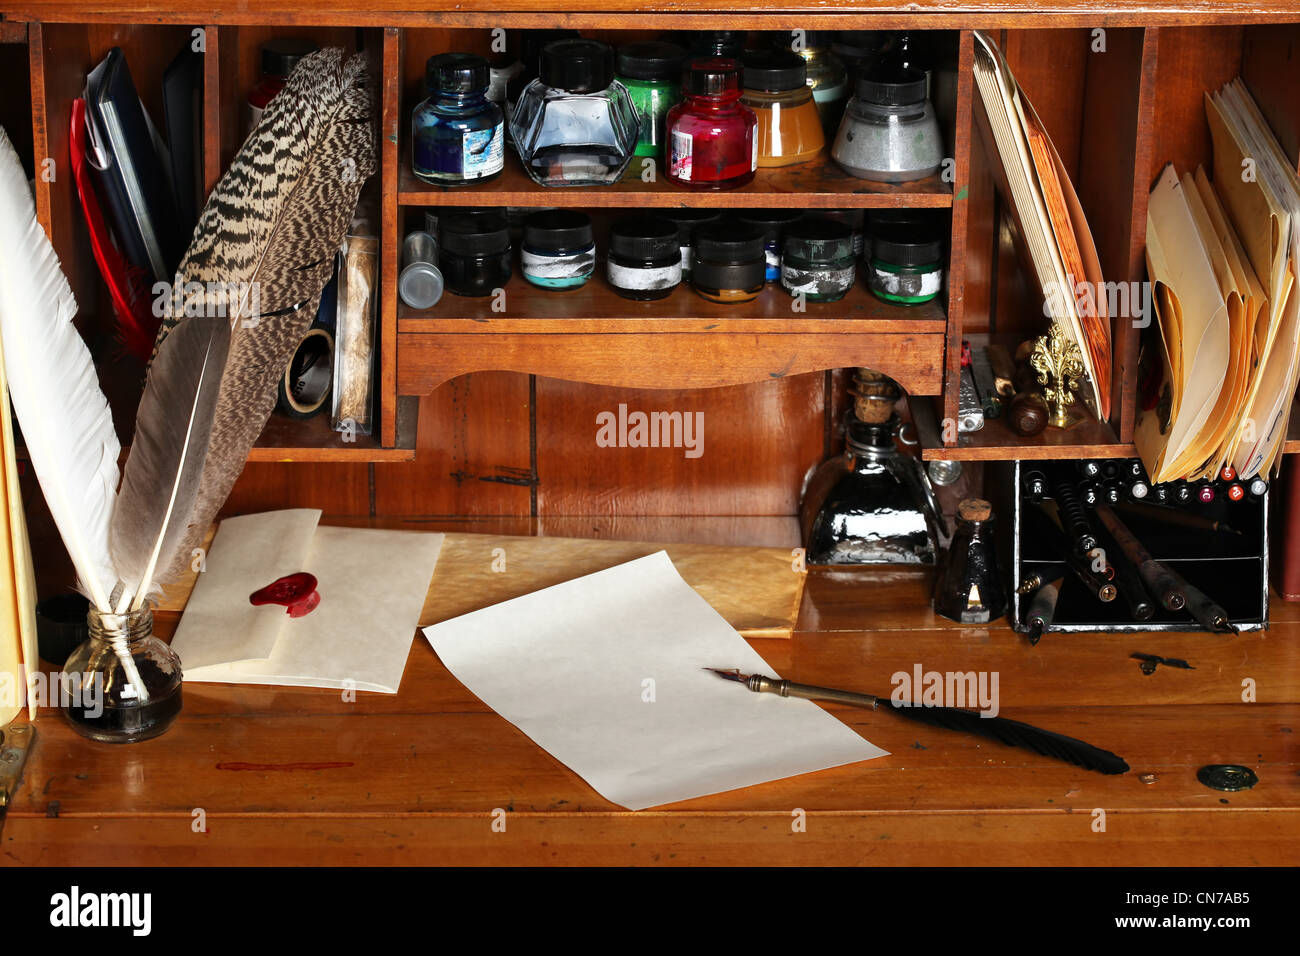 Old writing desk full of quills & inks for calligraphy Stock Photo